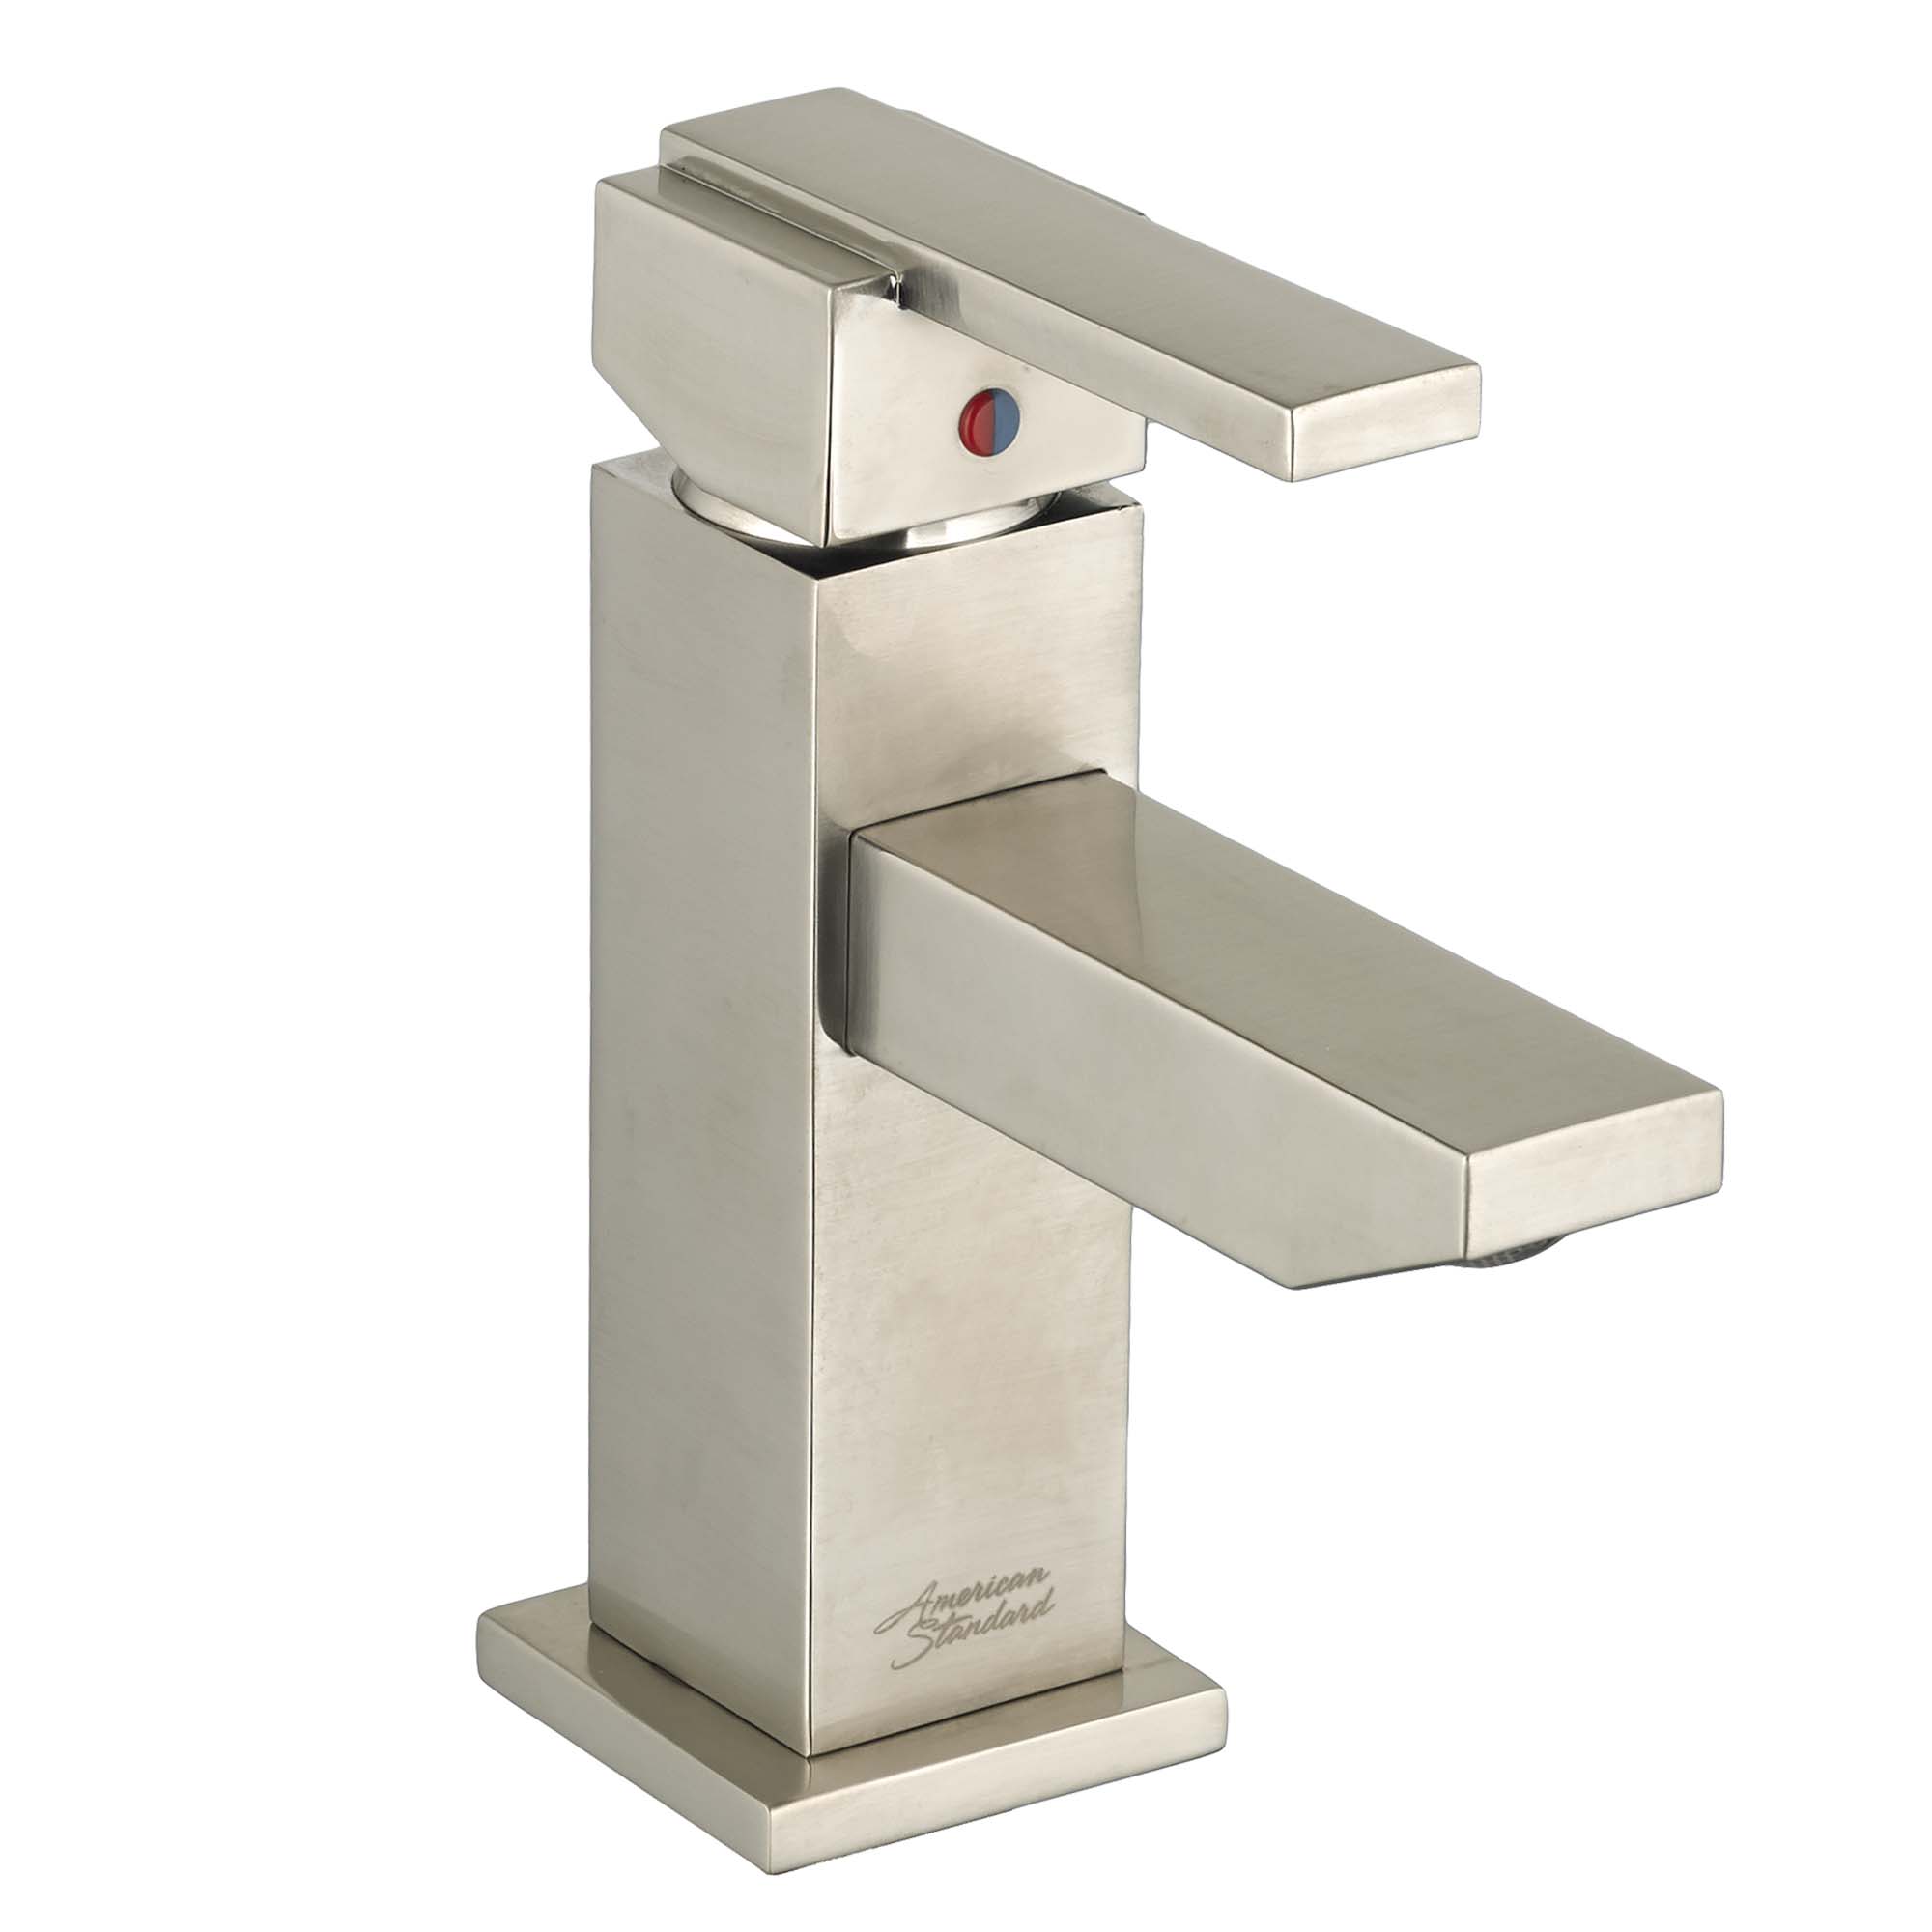 Time Square™ Single Hole Single-Handle Bathroom Faucet 1.2 gpm/4.5 L/min With Lever Handle